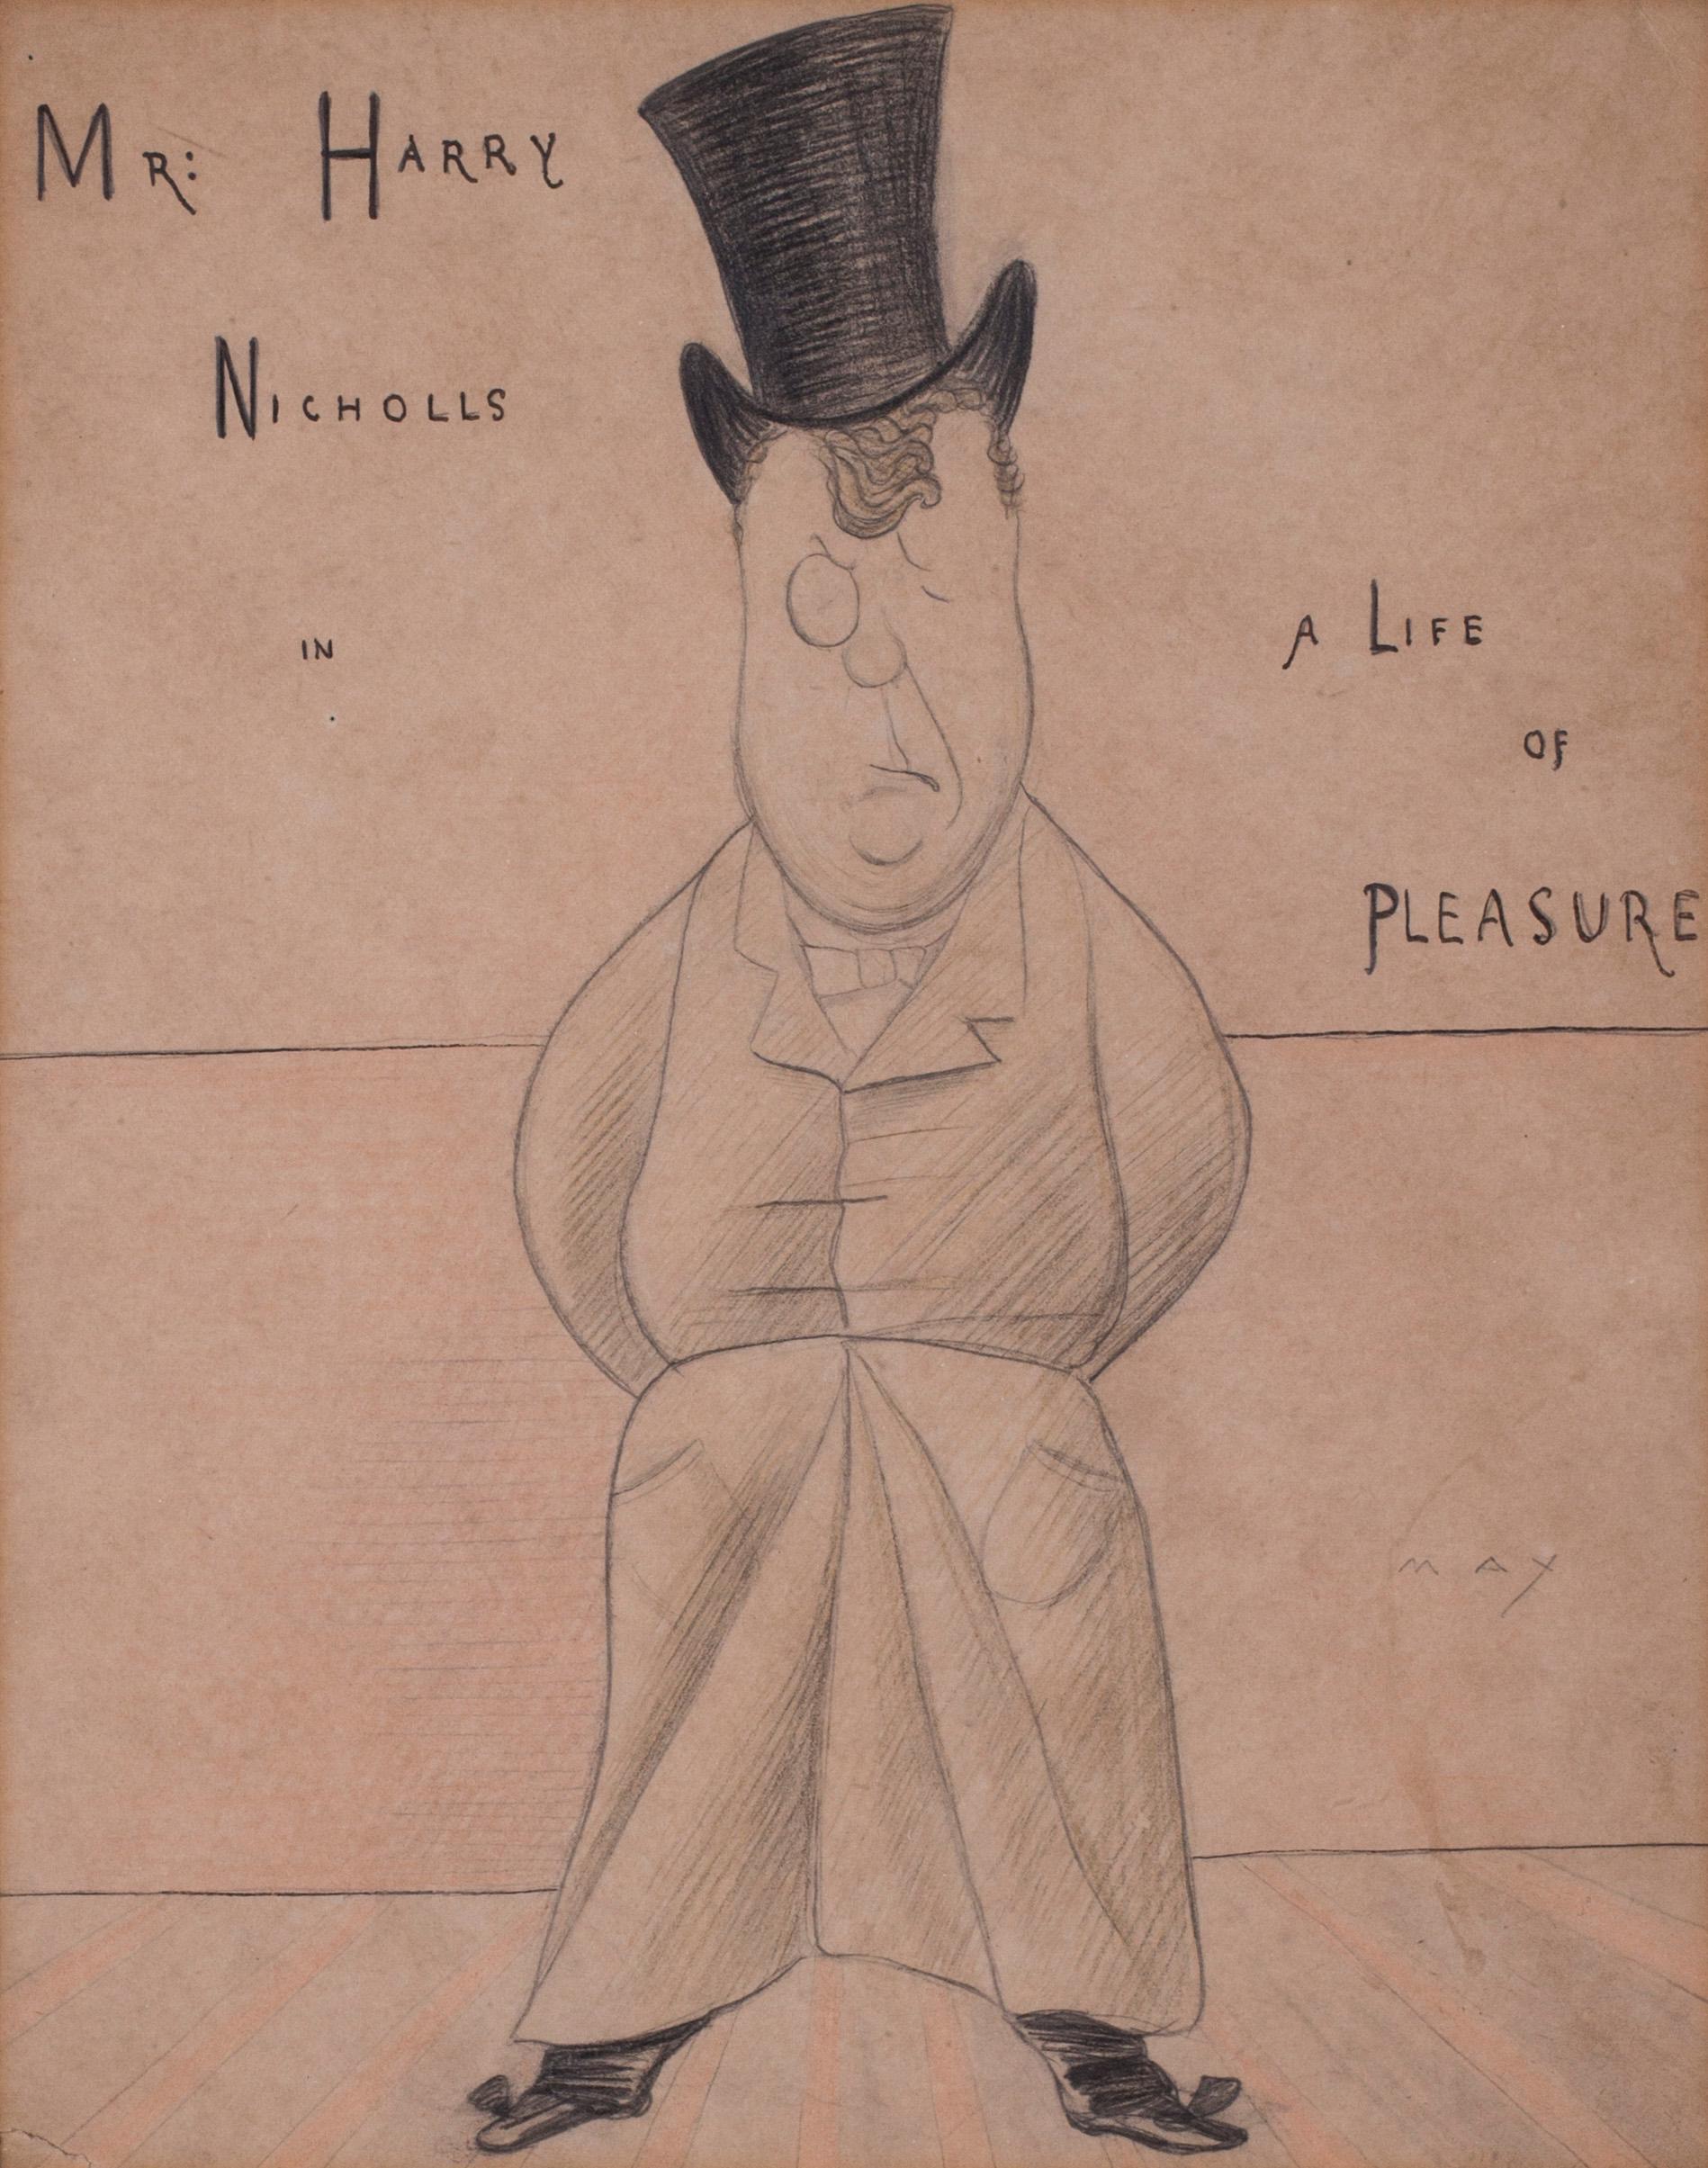 Max Beerbohm (British, 1872 – 1956)
Mr Harry Nicholls (In a life of pleasure), 1893
Signed ‘MAX’ (lower right), inscribed with title in ink
Pencil on paper with evidence of some watercolour
11 x 8.5/8 in. (28 x 22 cm.)

Henry Thomas 